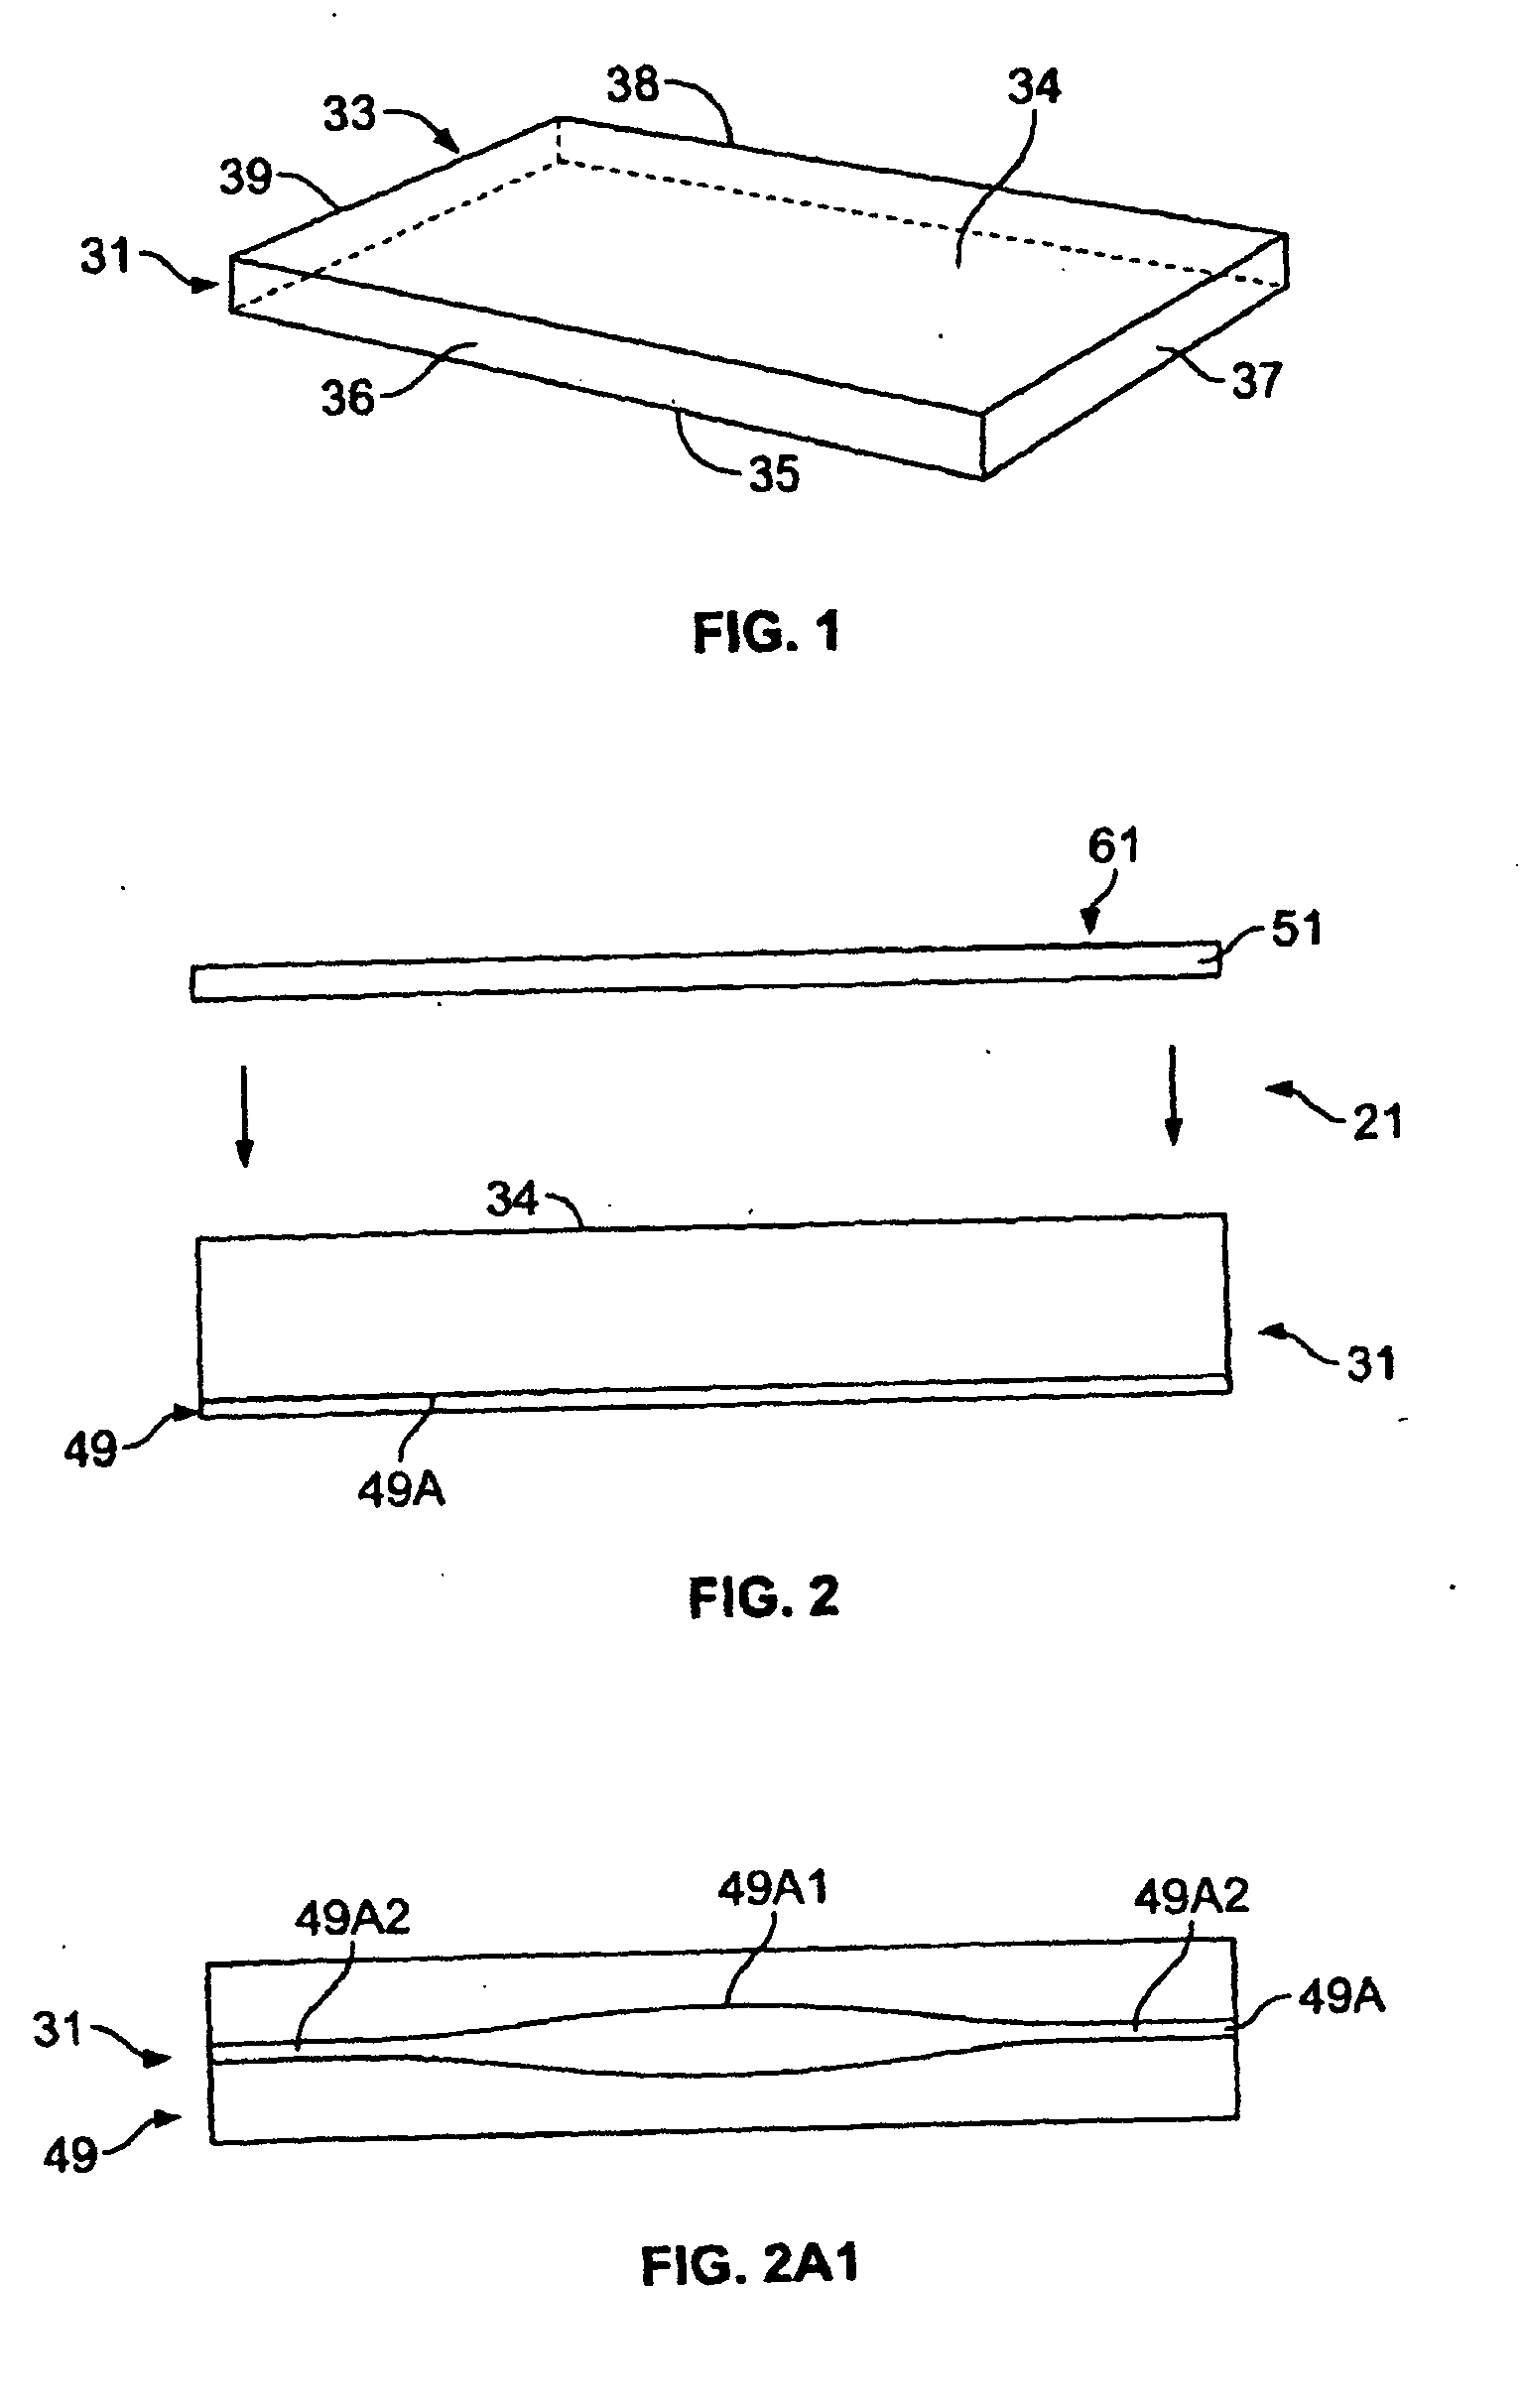 System and Methods for Automatic Preparation of Substitute Food Items